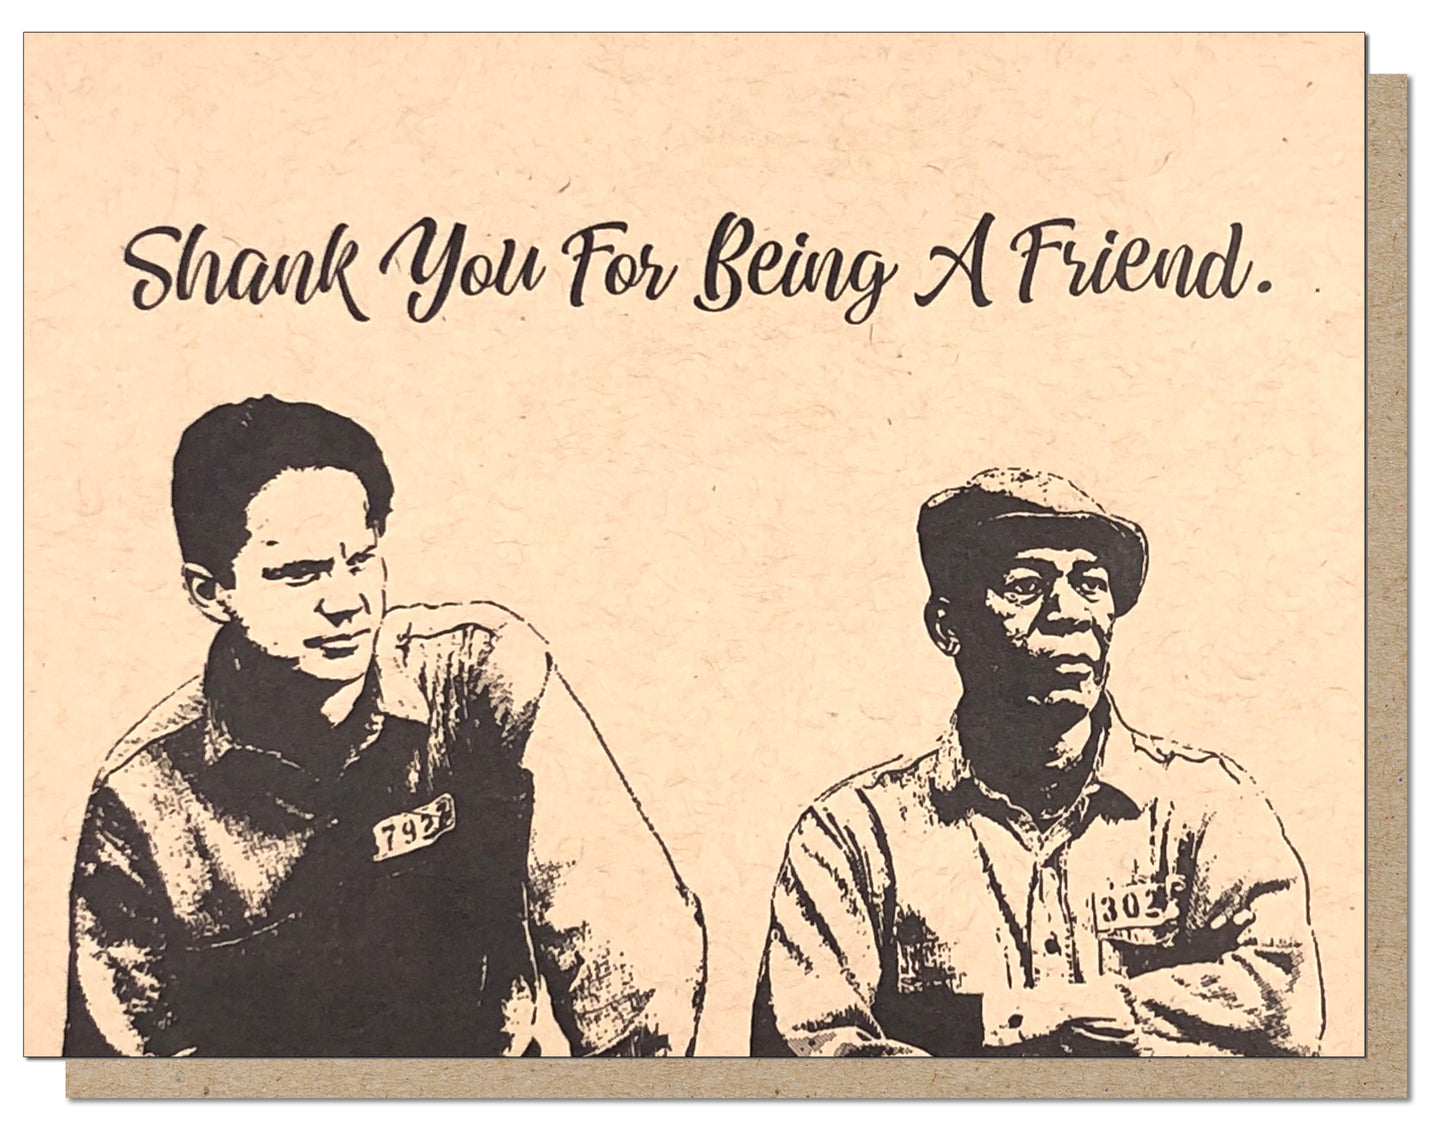 Shank You For Being a Friend Card